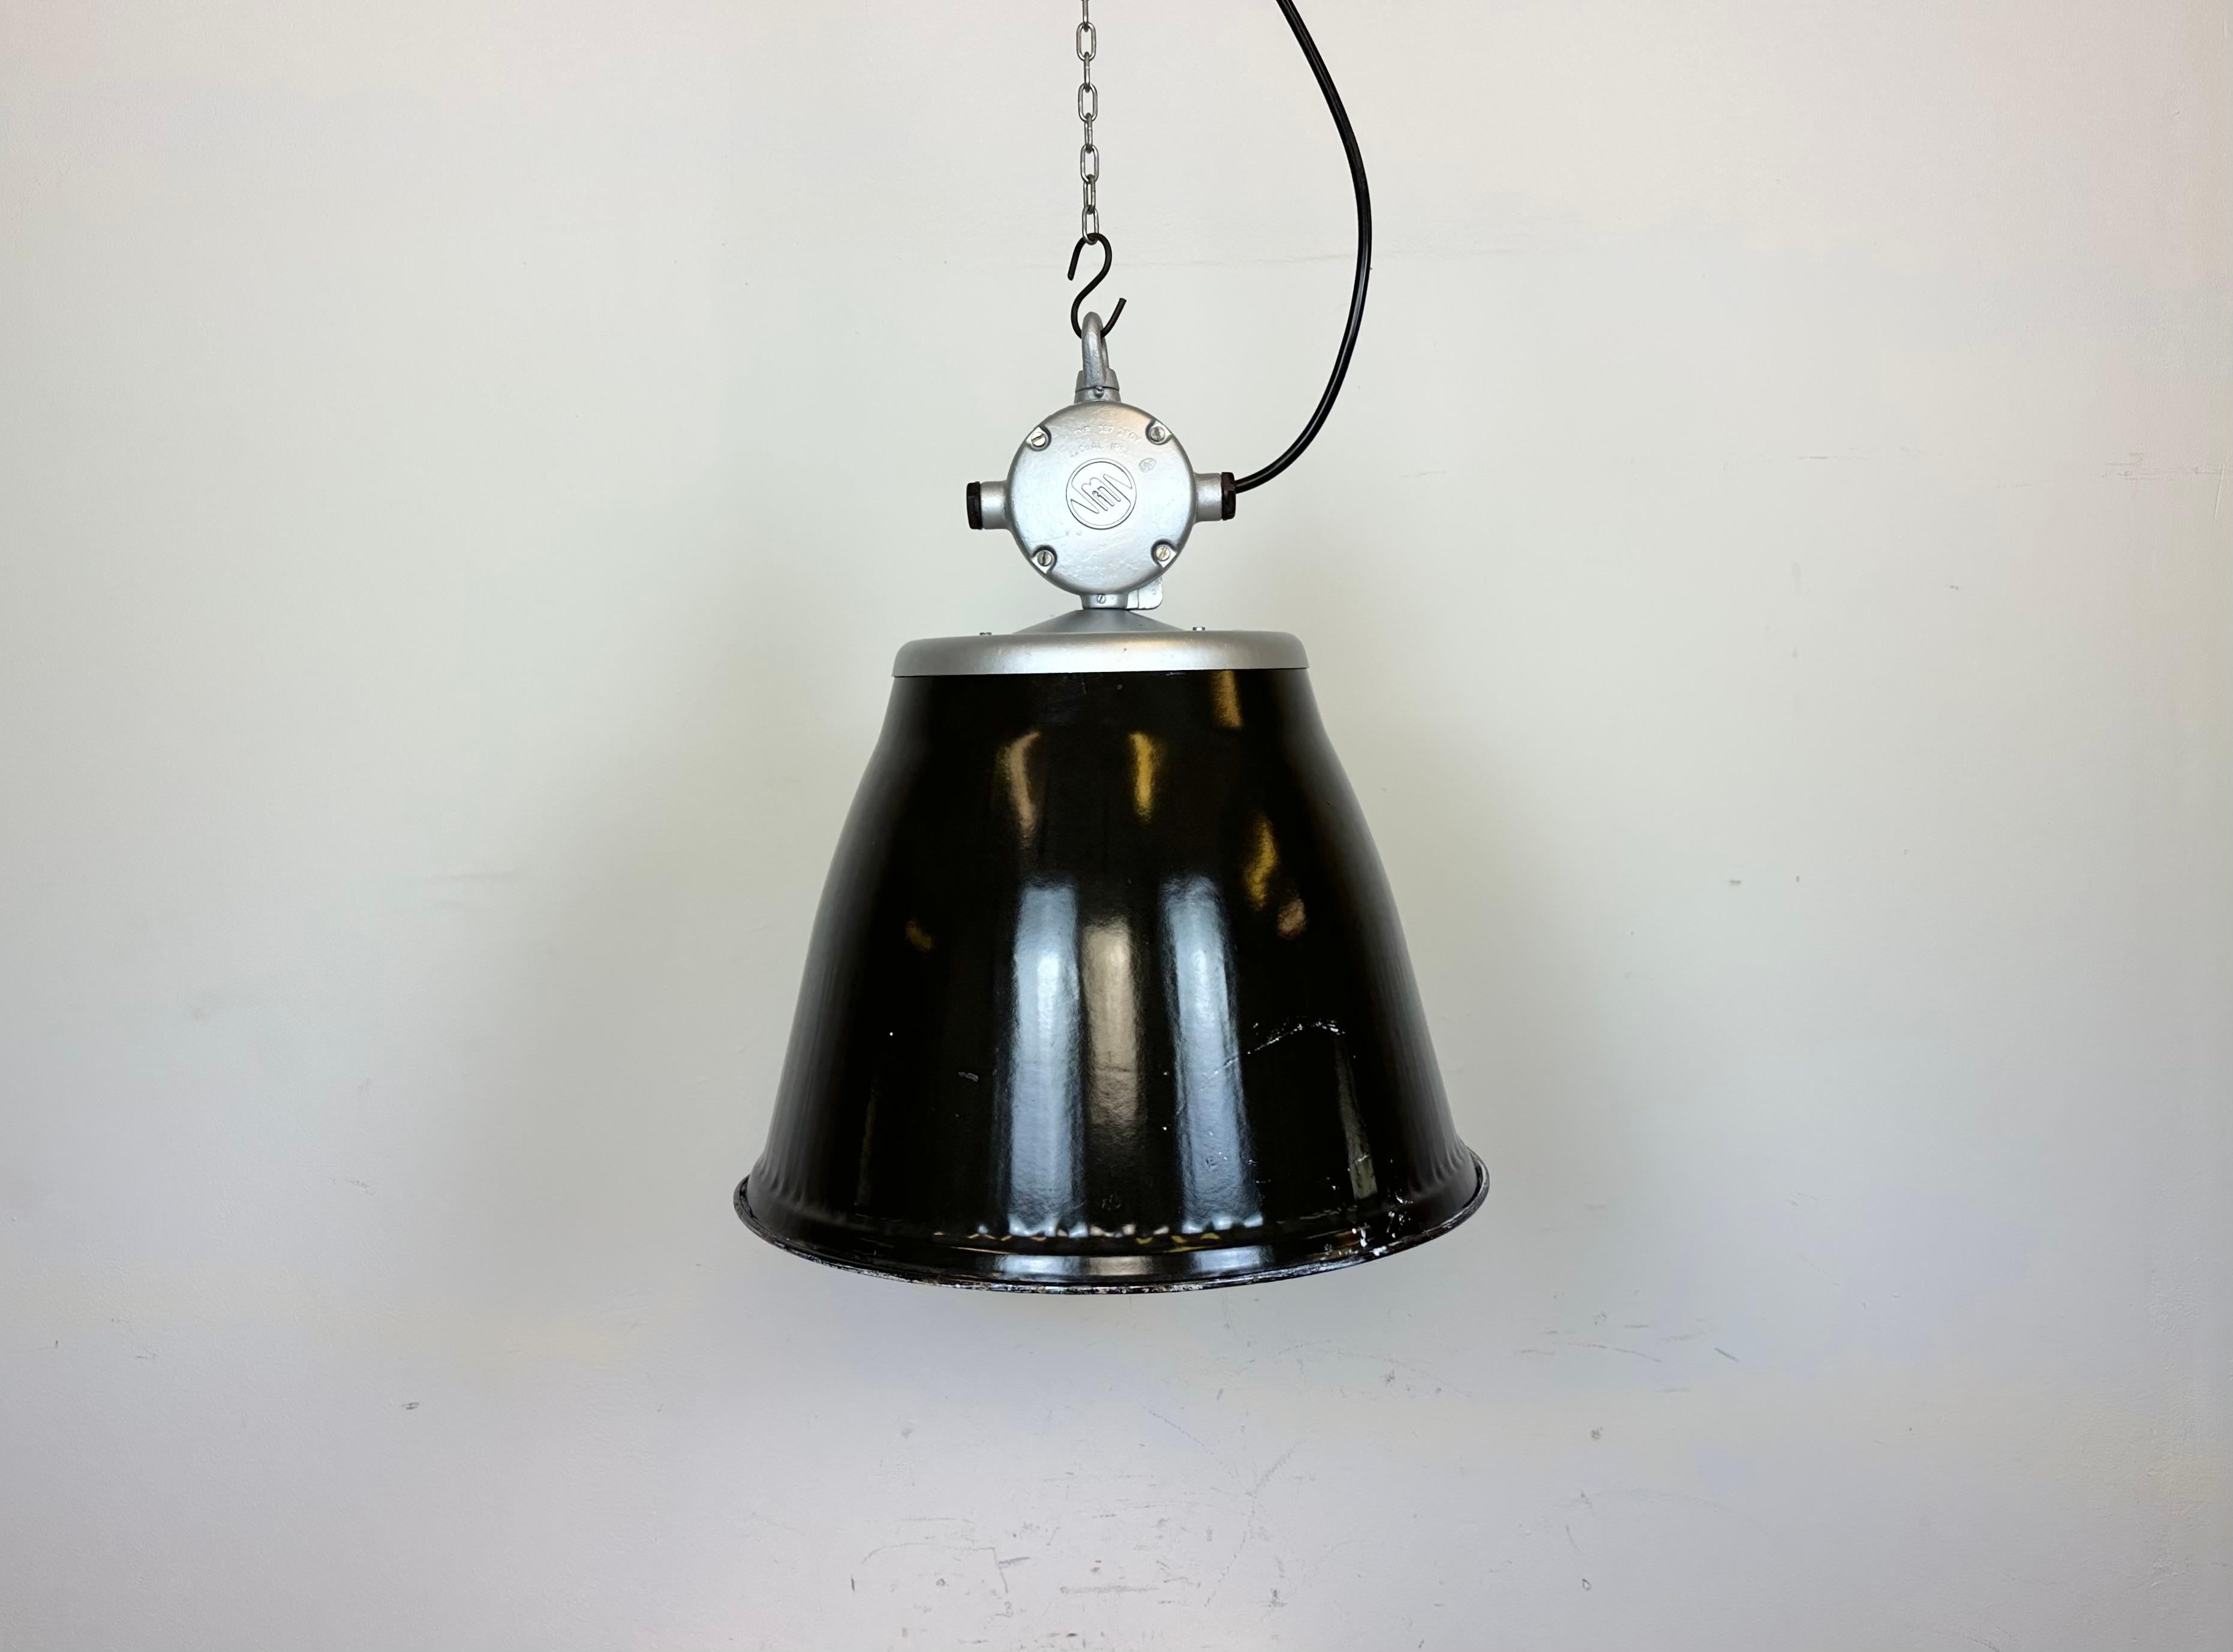 Industrial enamel hanging lamp made by Elektrosvit in former Czechoslovakia during the 1960s. It features a cast aluminium top newly painted on silver and a black enamel shade with white interior. New porcelain socket requires standard E 27/ E 26